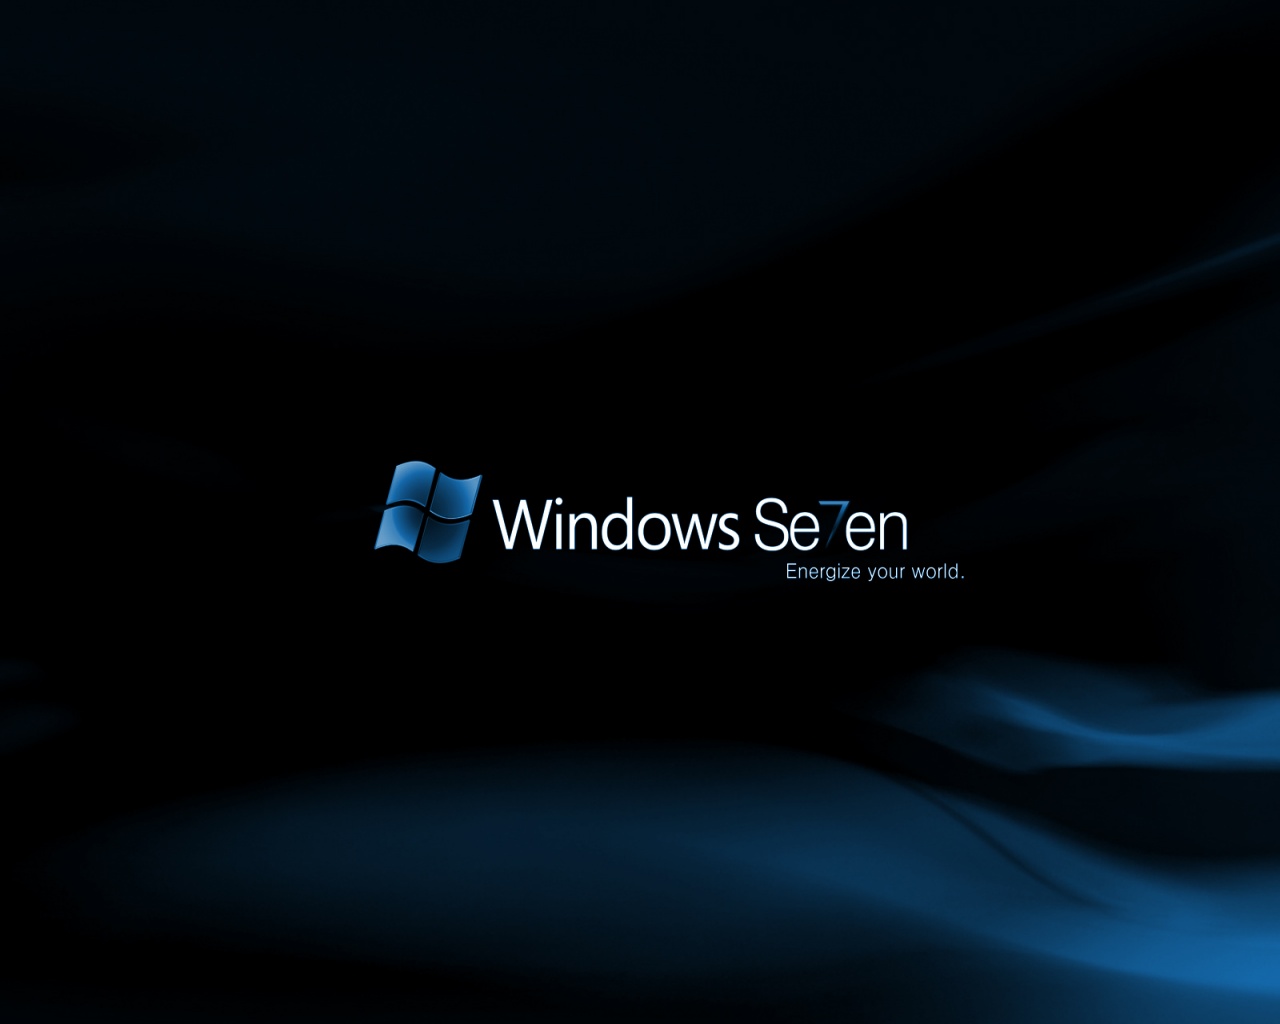 Dell Desktop Windows HD Wallpaper For Your Background Or